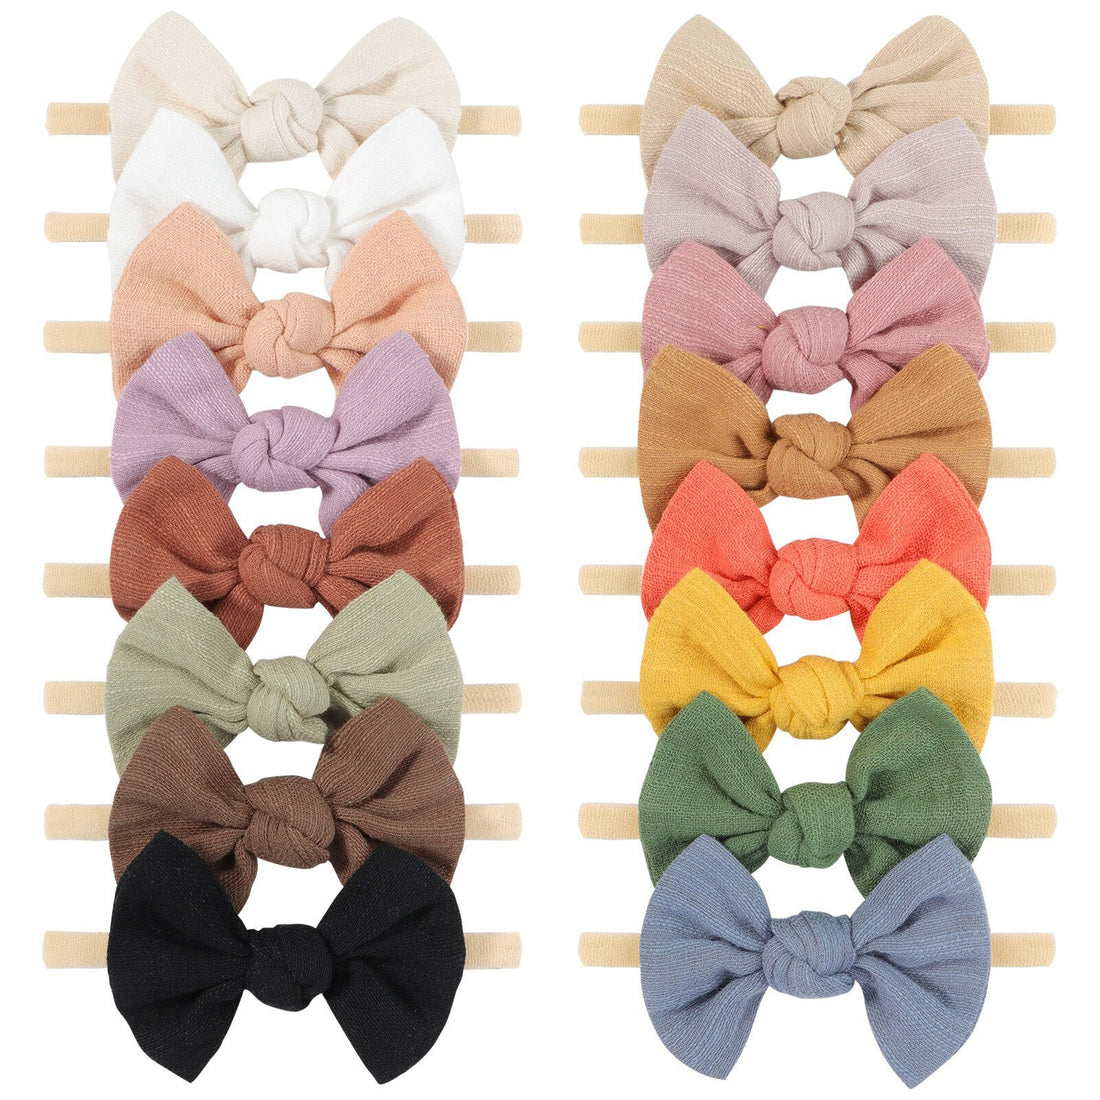 Knot Fabric Headband Bow - That's So Darling